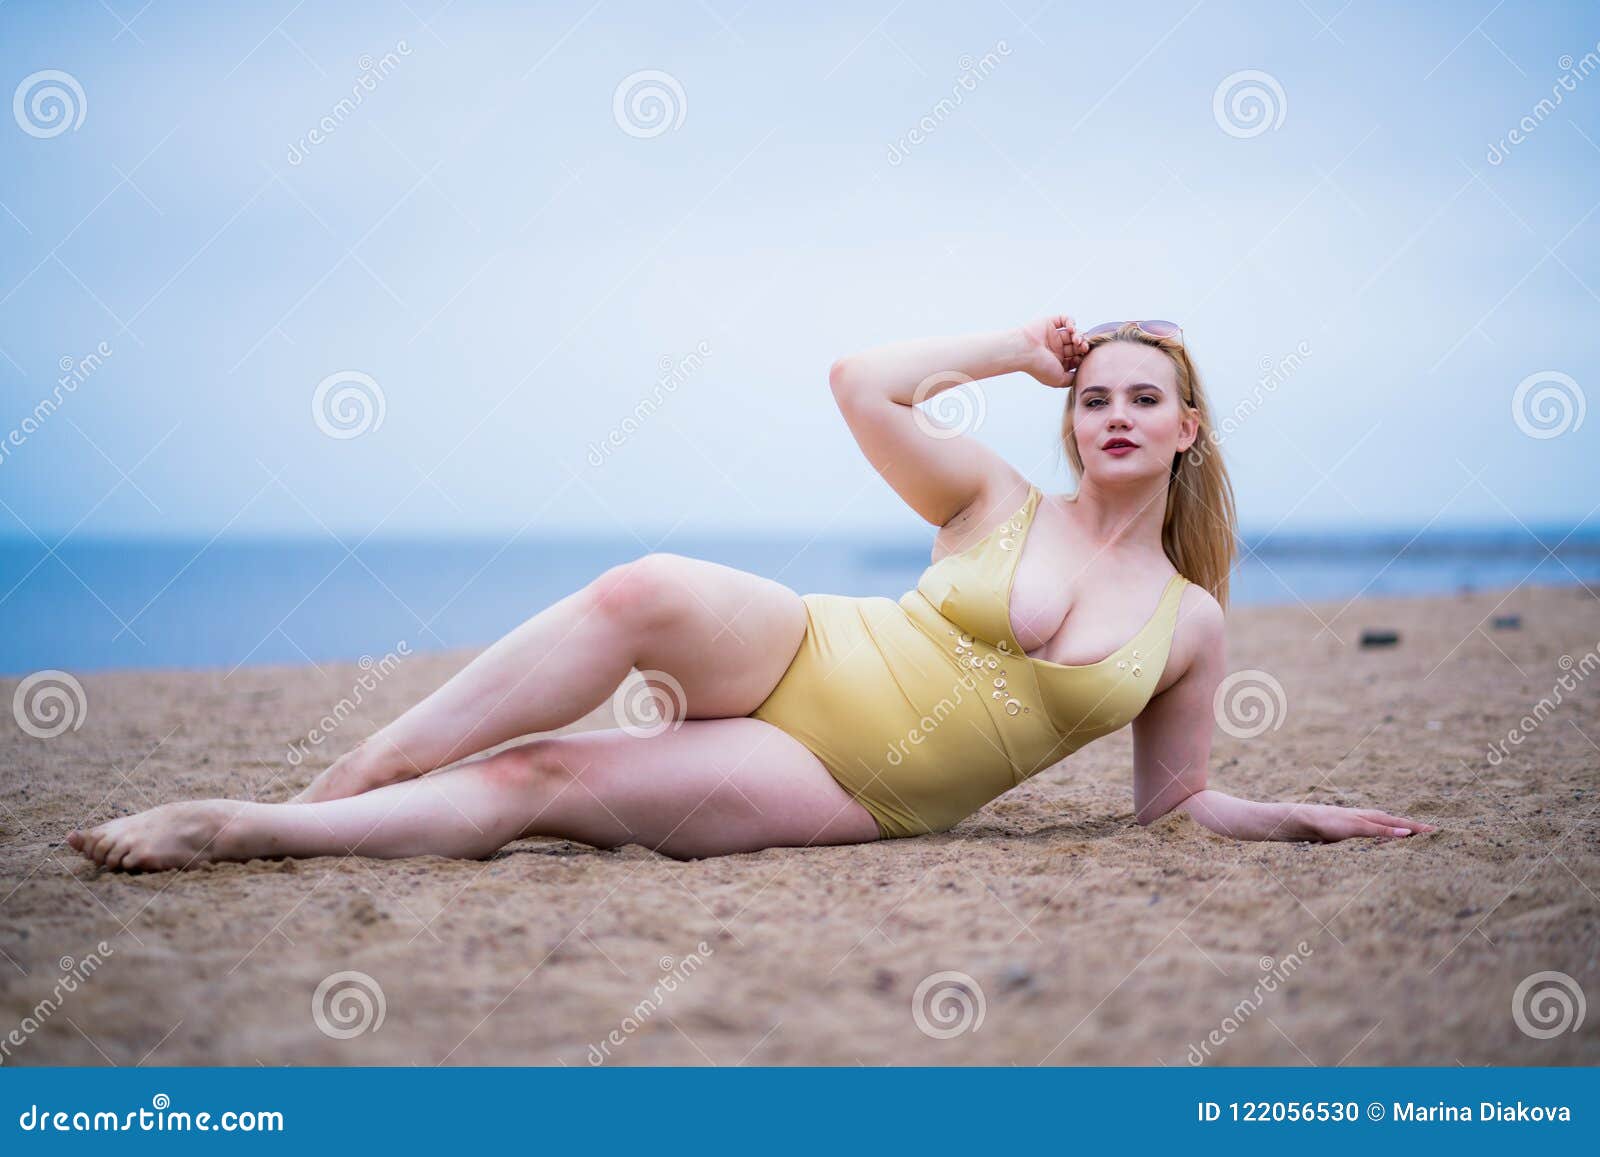 1,241 Plus Size Swimwear Photos - Free & Royalty-Free from Dreamstime